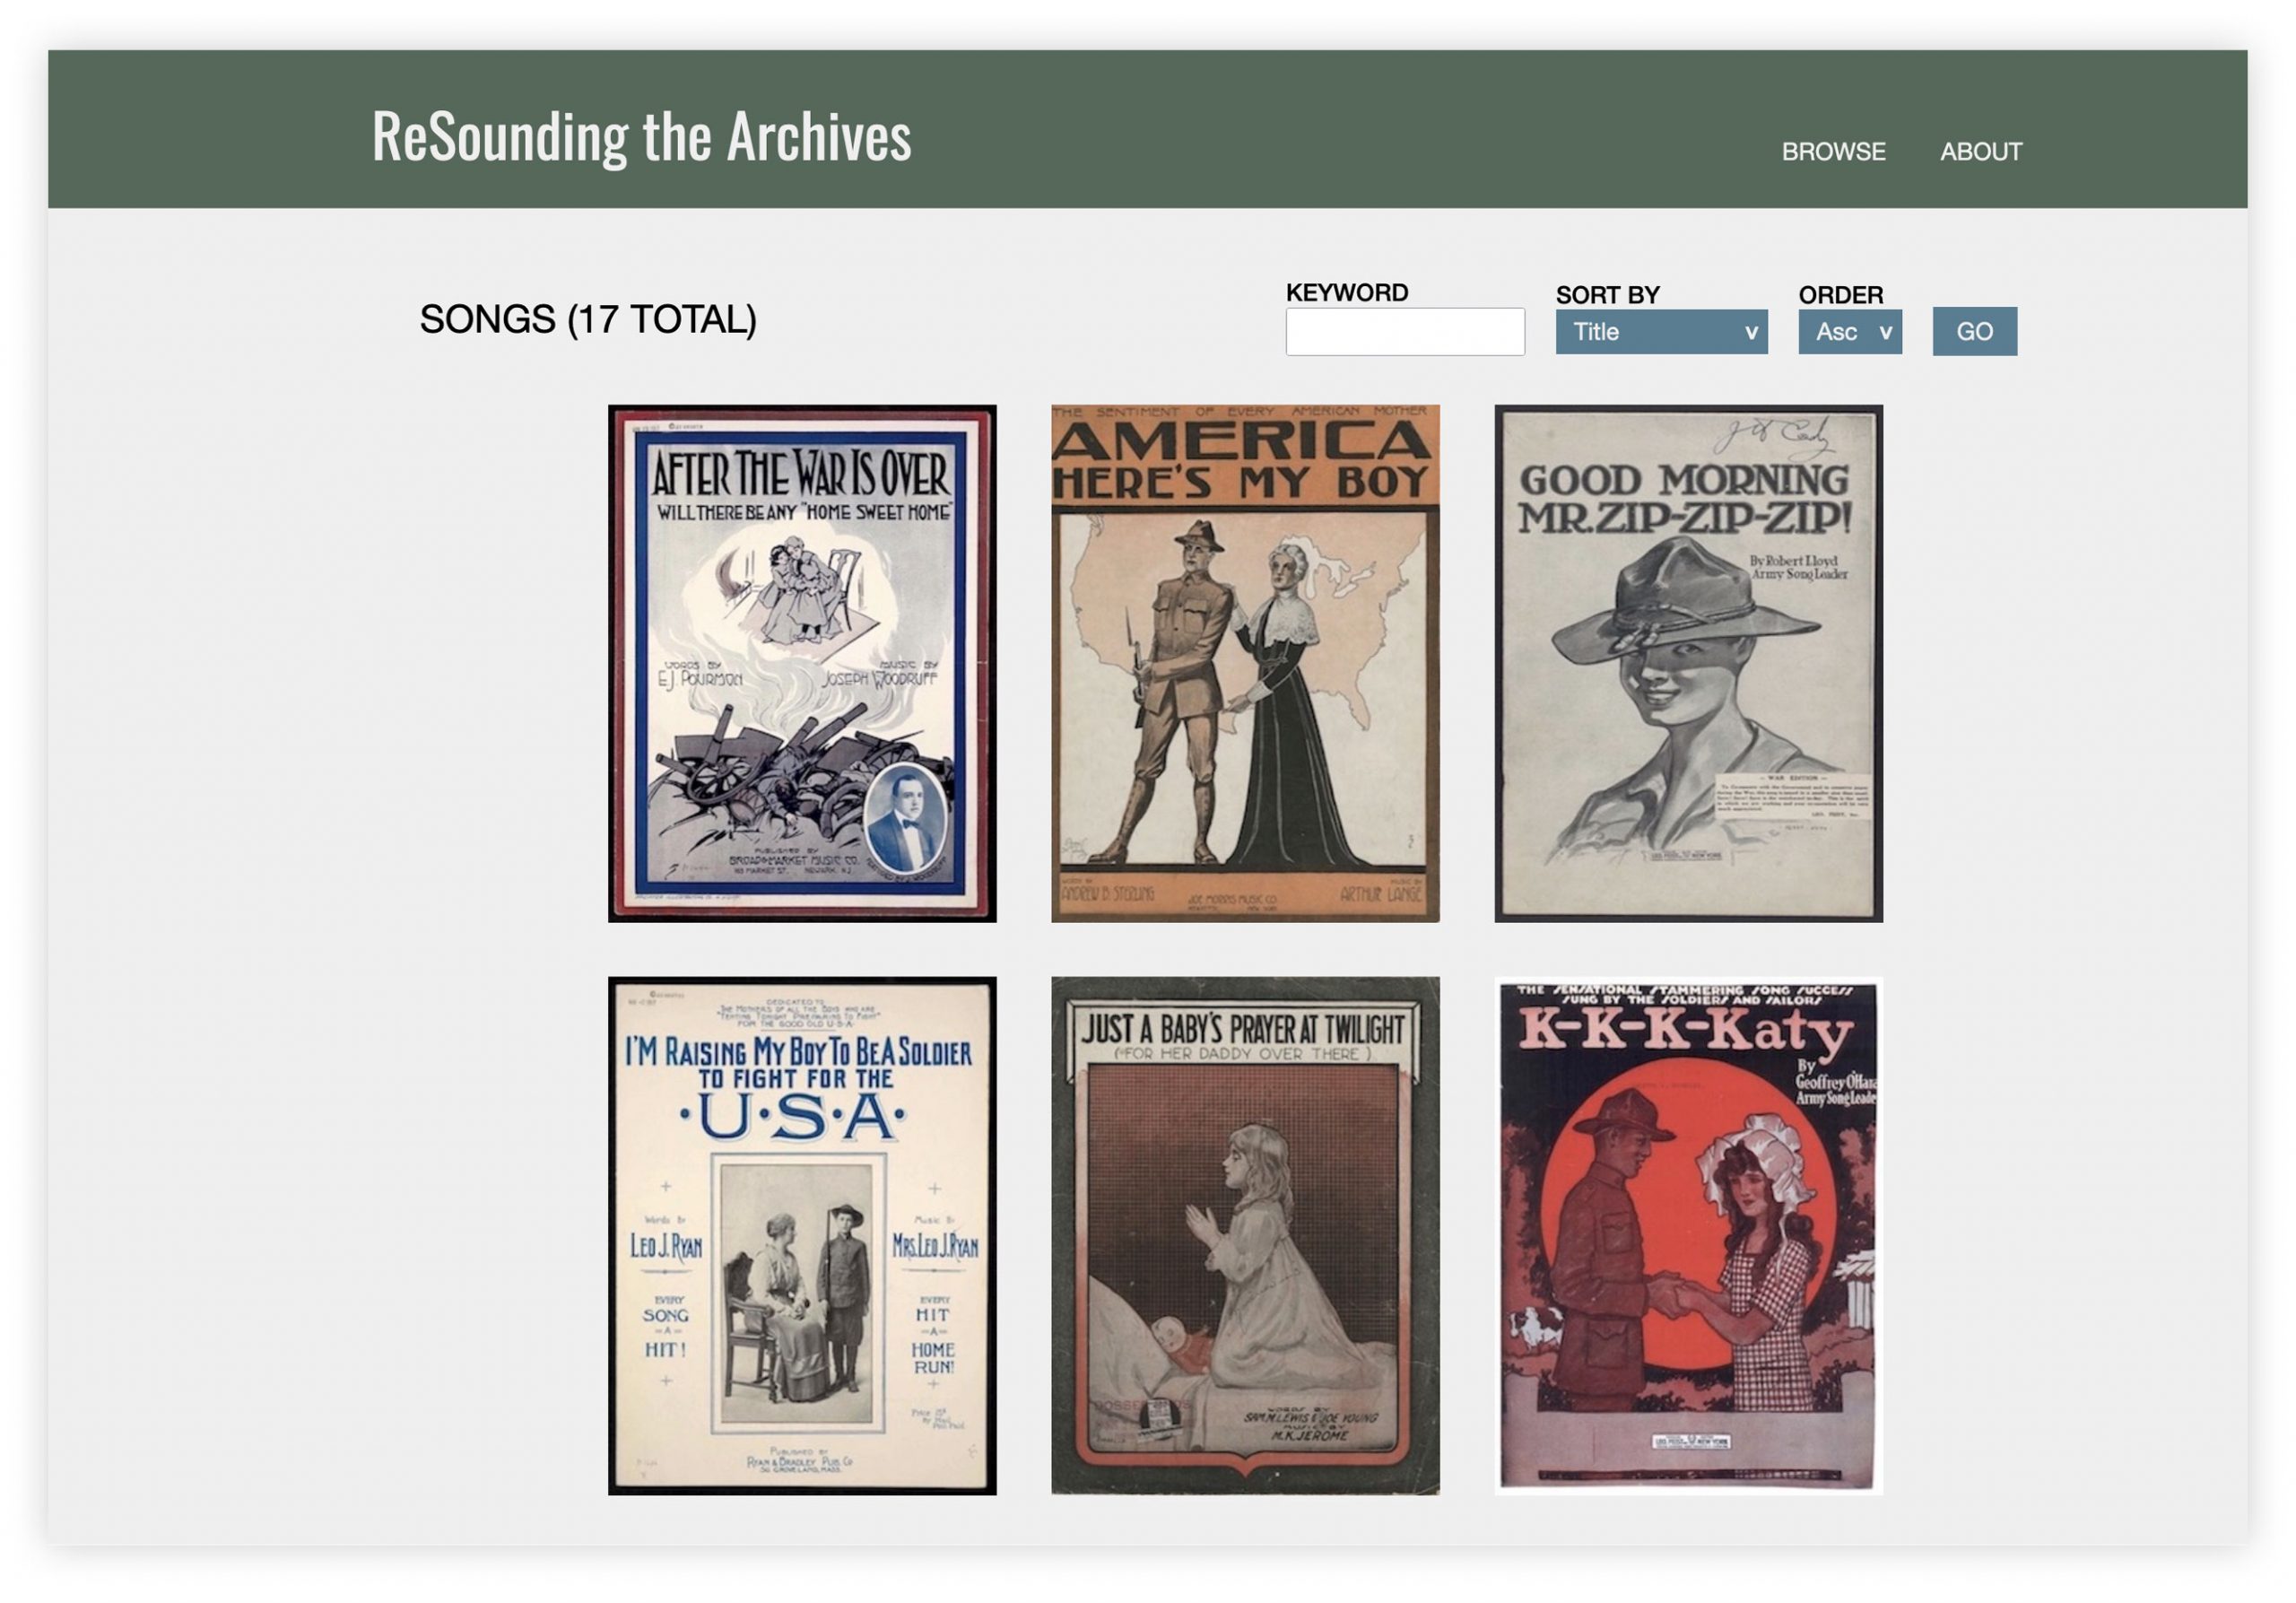 Screengrab of the ReSounding the Archives website Songs page.